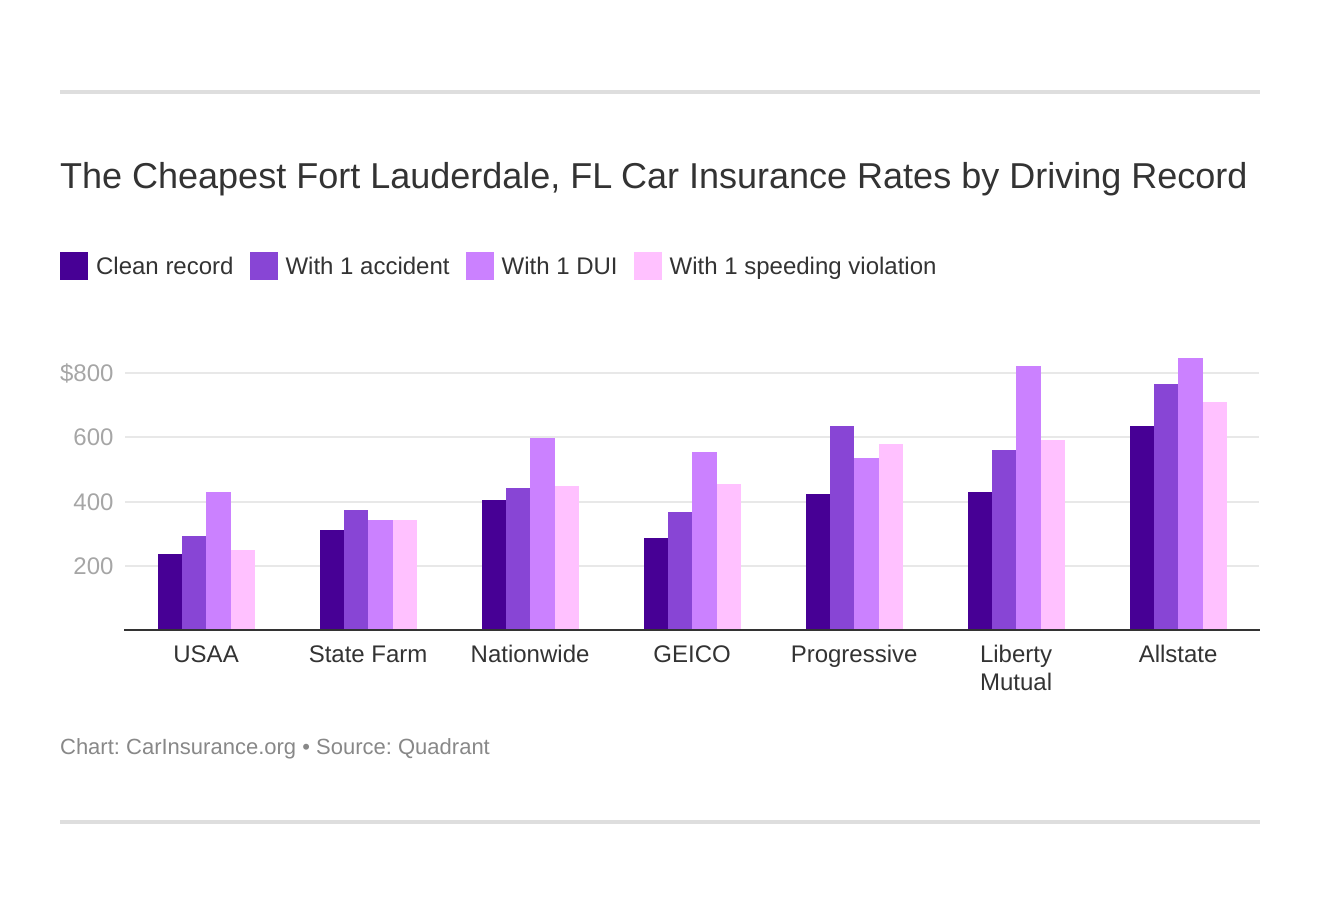 The Cheapest Fort Lauderdale, FL Car Insurance Rates by Driving Record